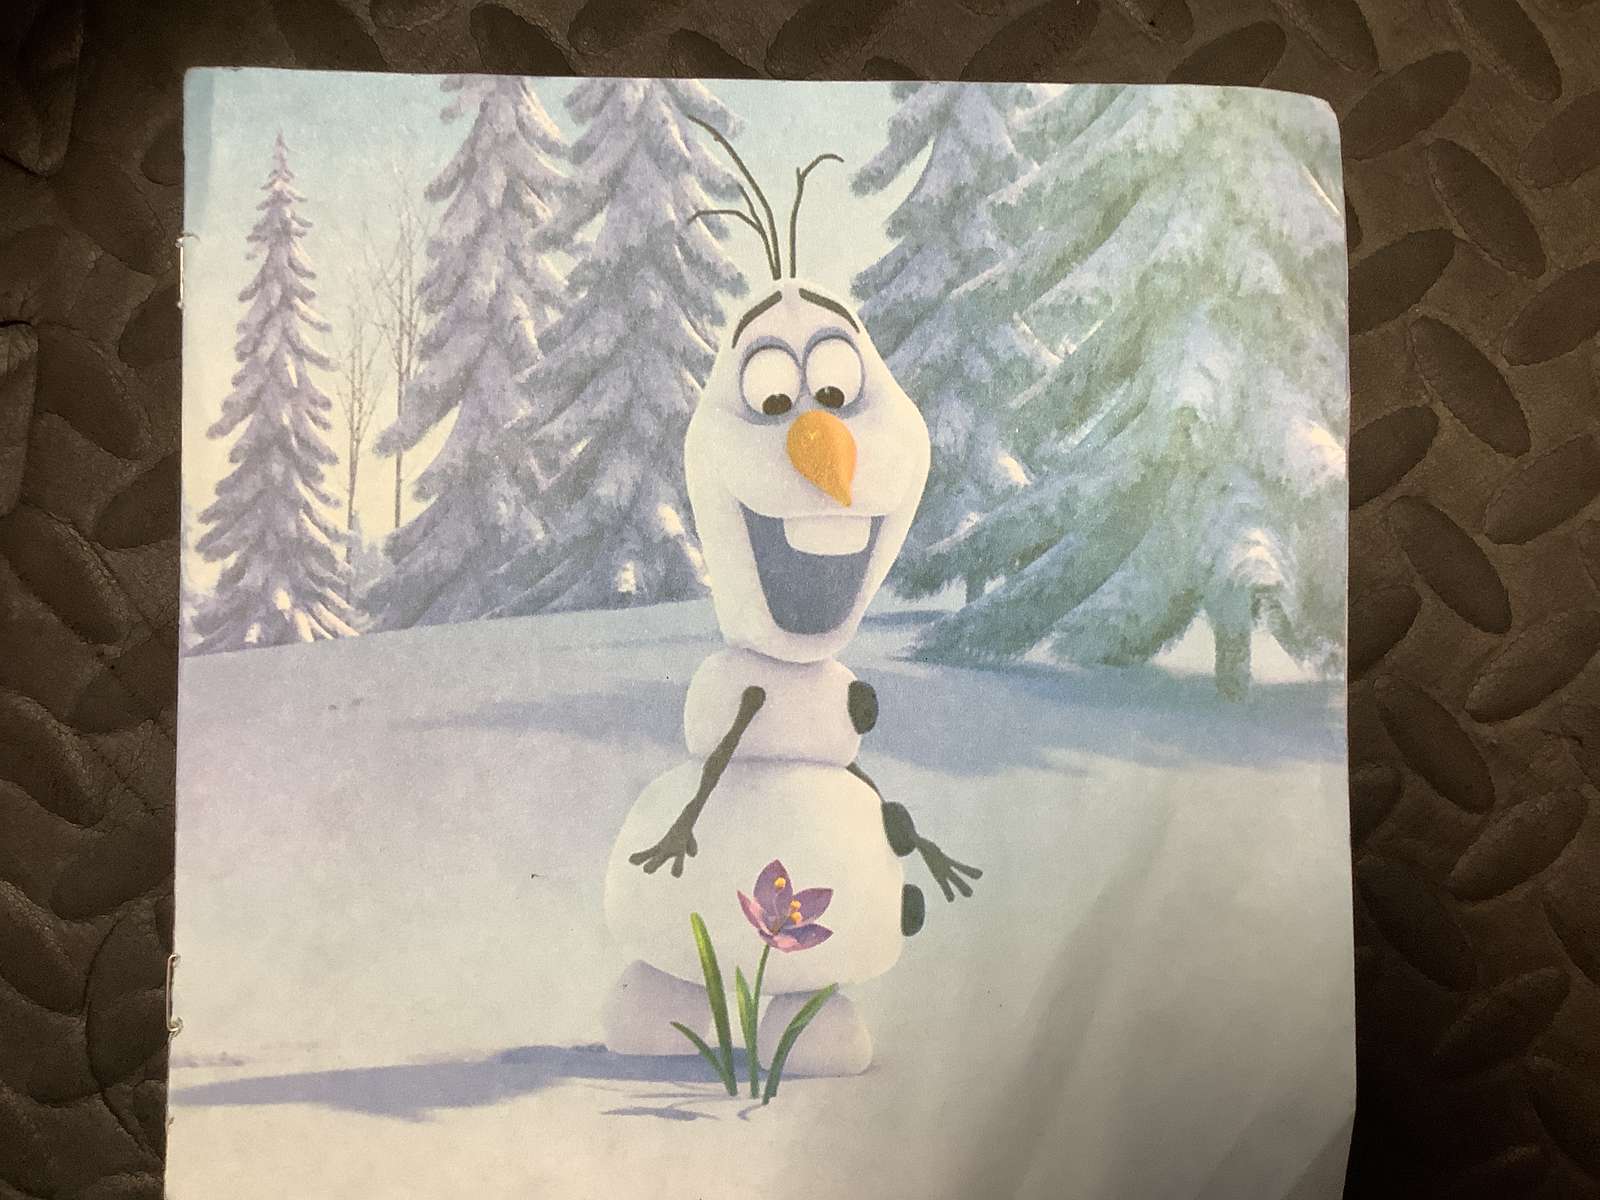 Olaf in snow jigsaw puzzle online